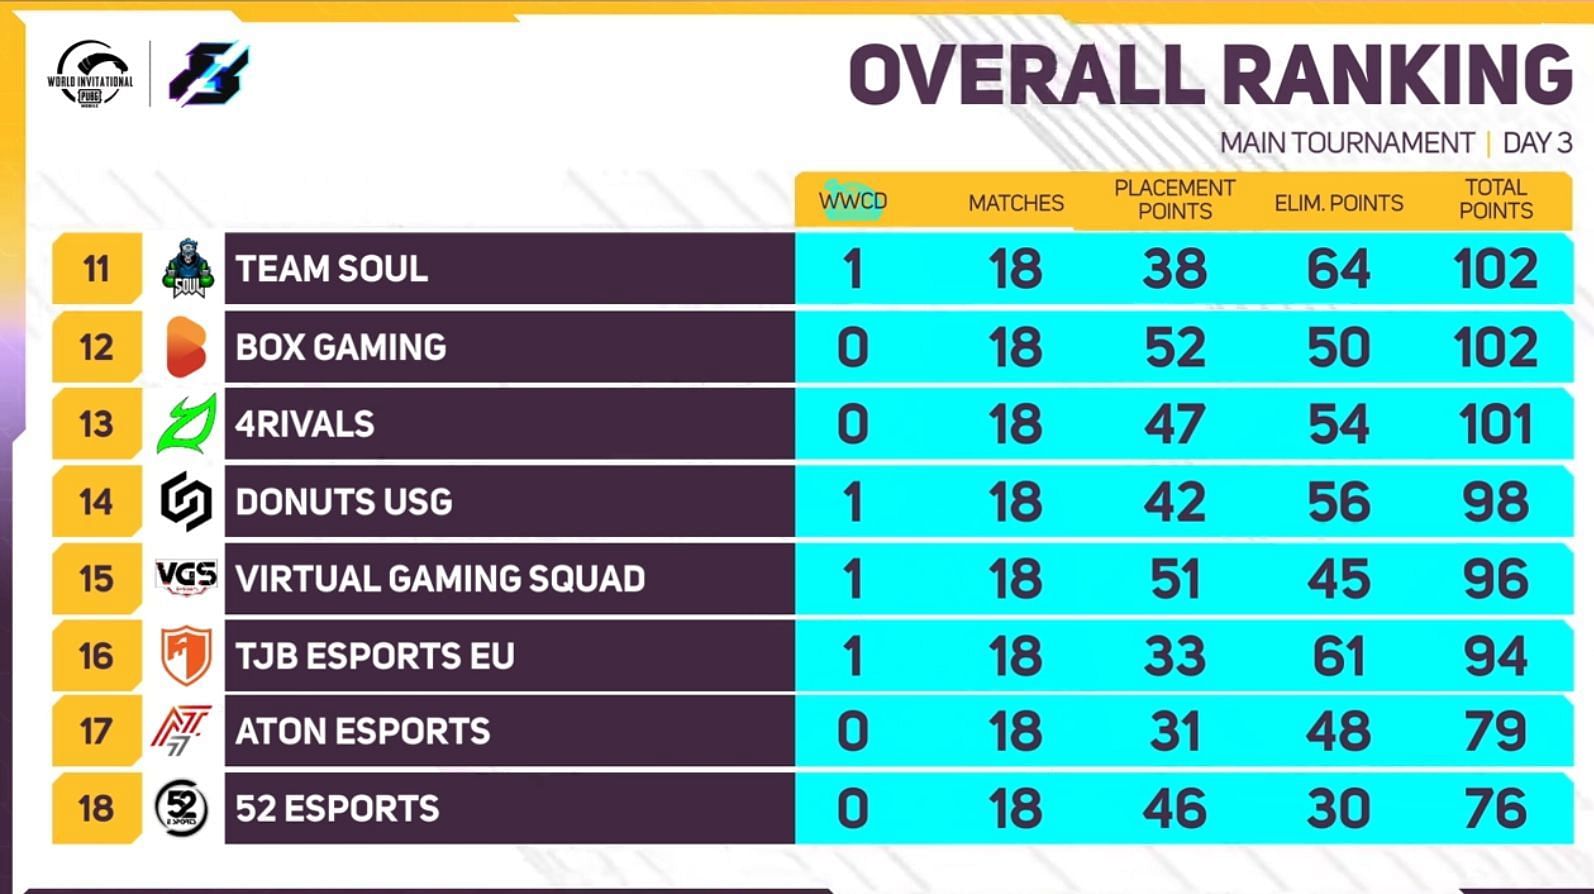 52 Esports placed 18th position (Image via PUBG Mobile)